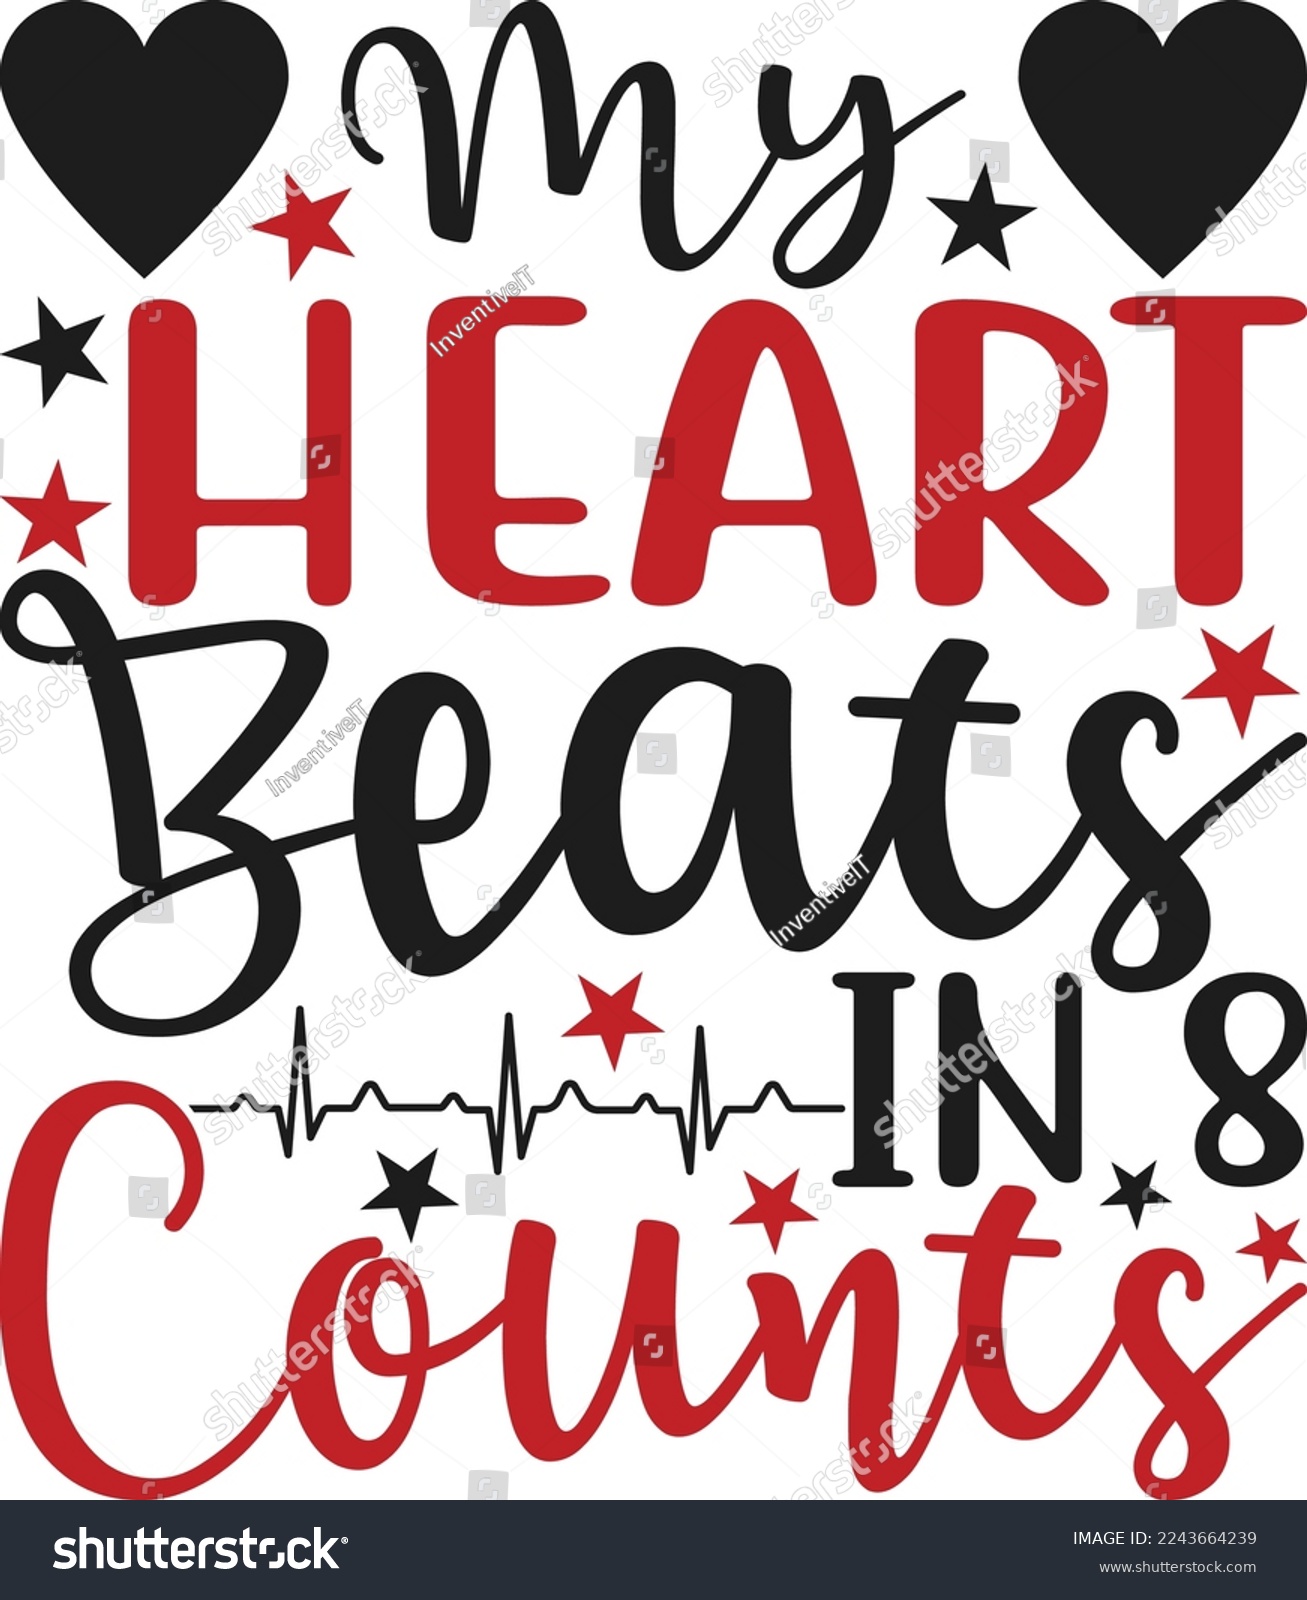 SVG of My Heart Beats In 8 Counts SVG Printable Vector Illustration svg